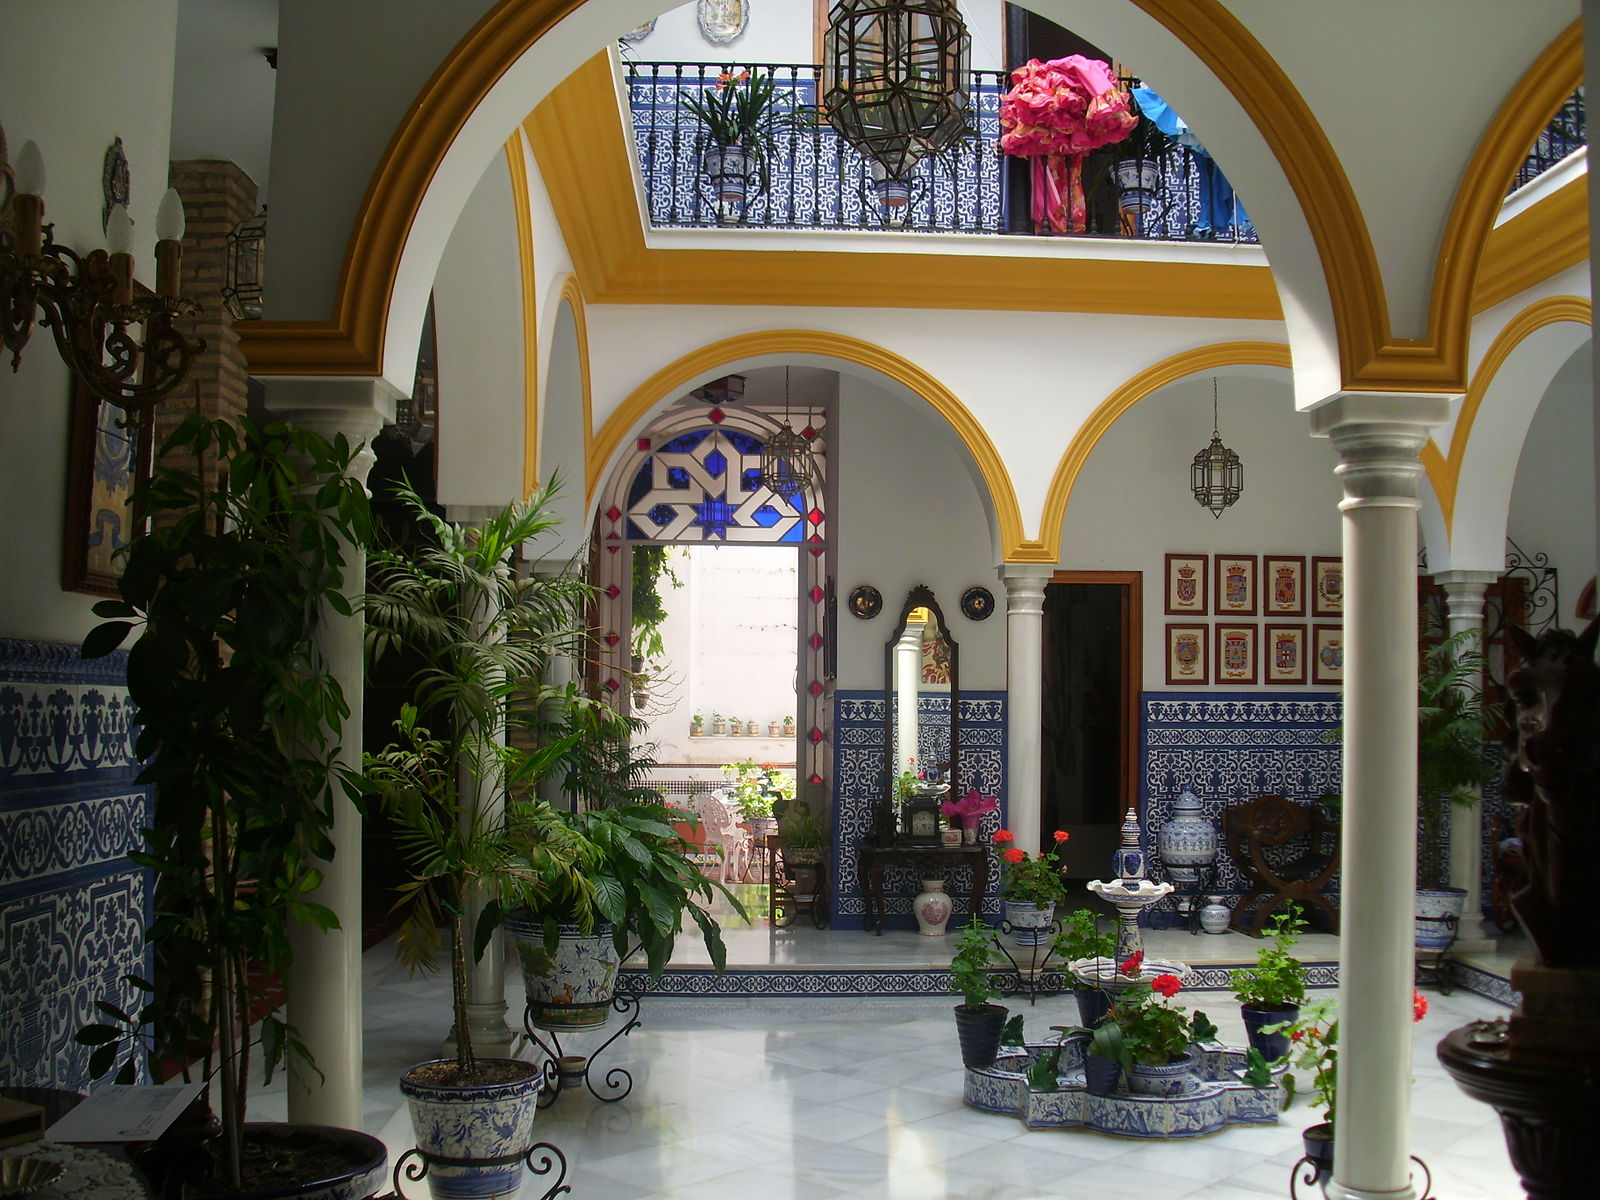 Courtyard In Seville as a Passive Design Strategy